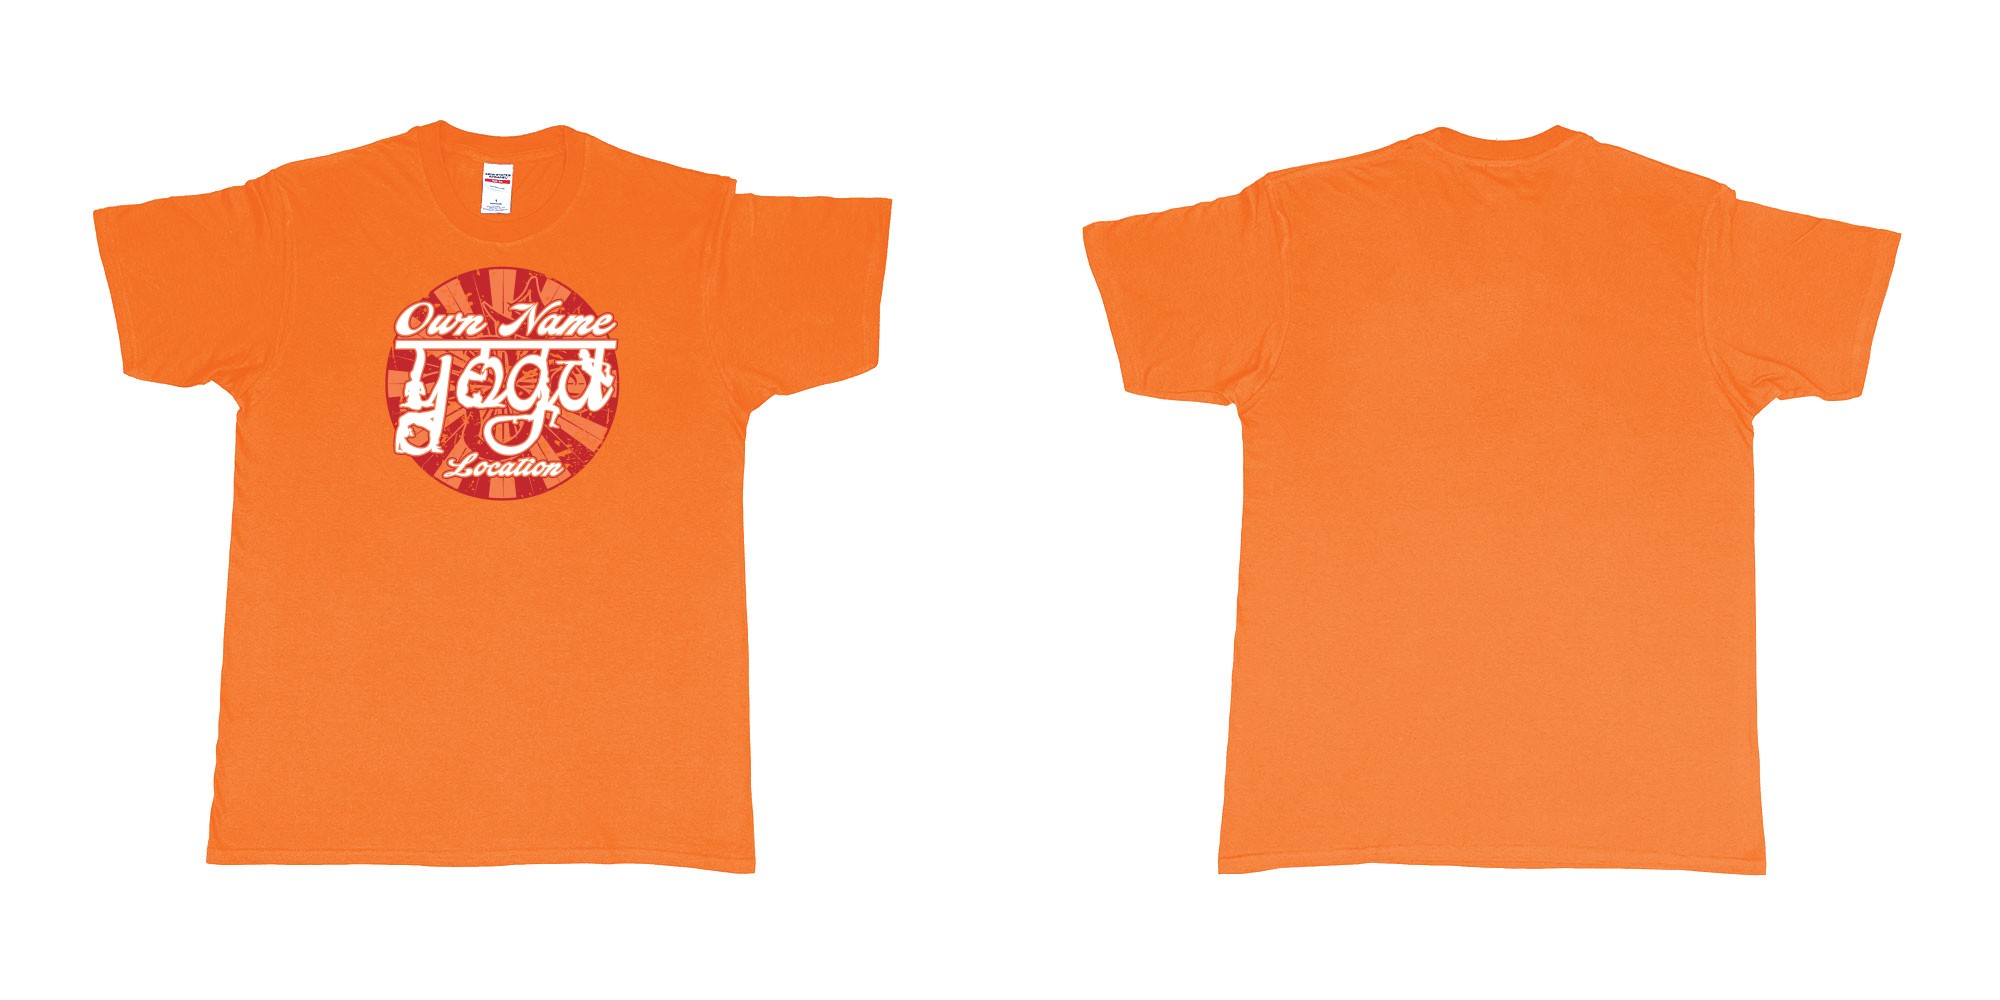 Custom tshirt design personalized yoga om sun retro own studio name location printing bali in fabric color orange choice your own text made in Bali by The Pirate Way